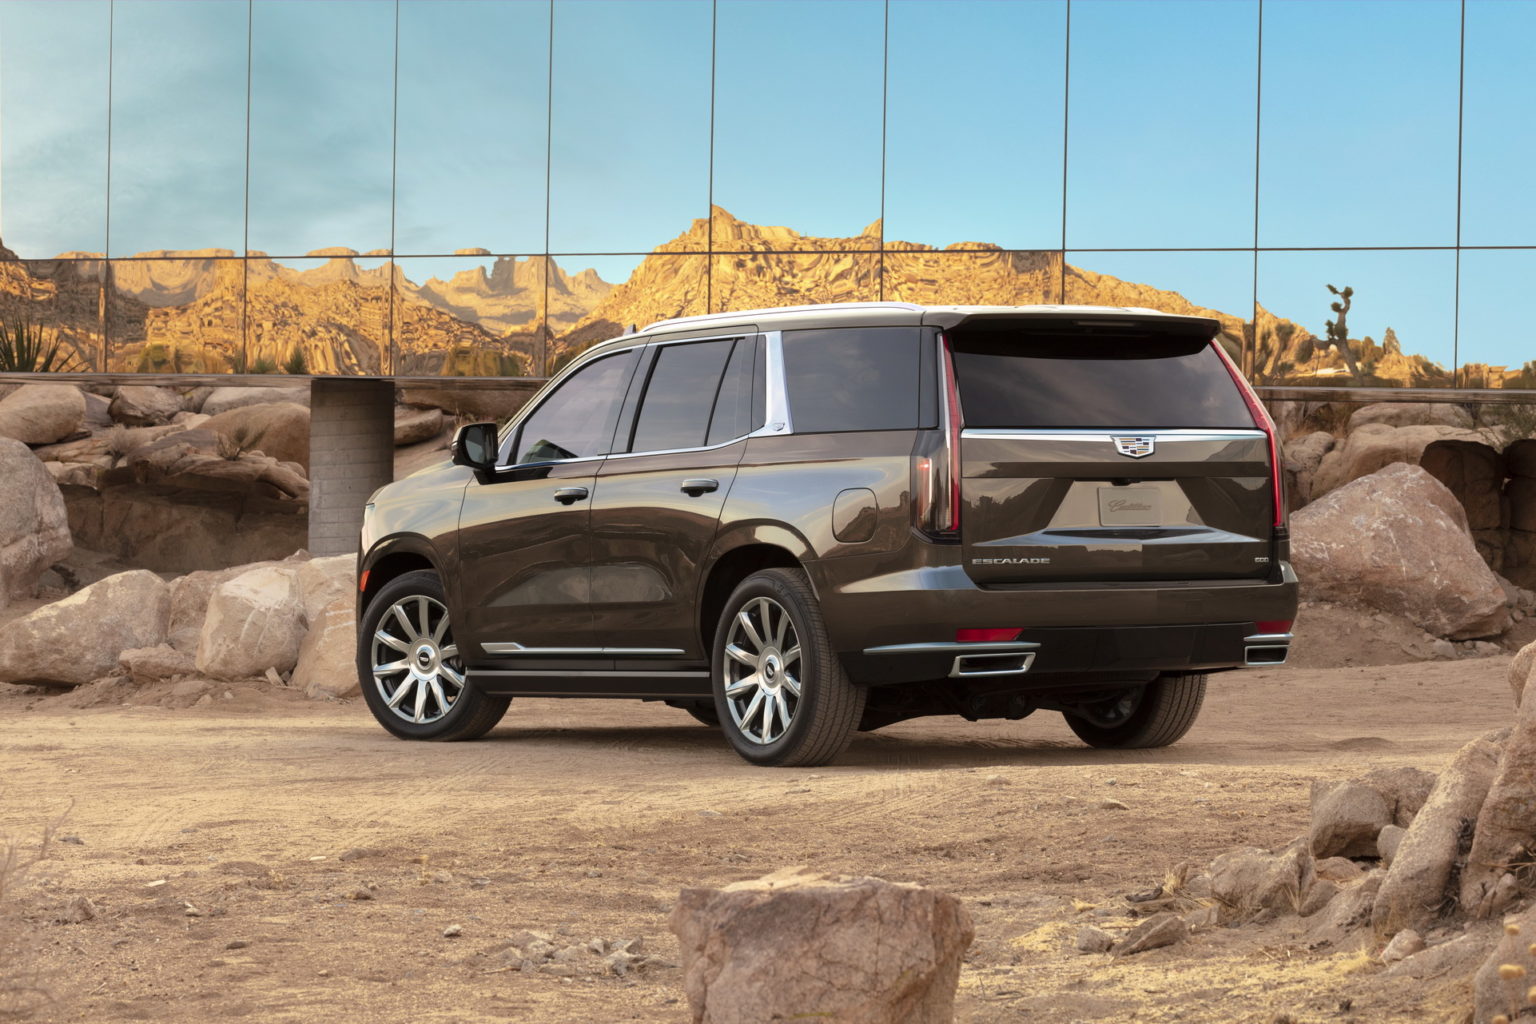 The Cadillac Escalade Now Offers Super Cruise. Here’s What You Need to